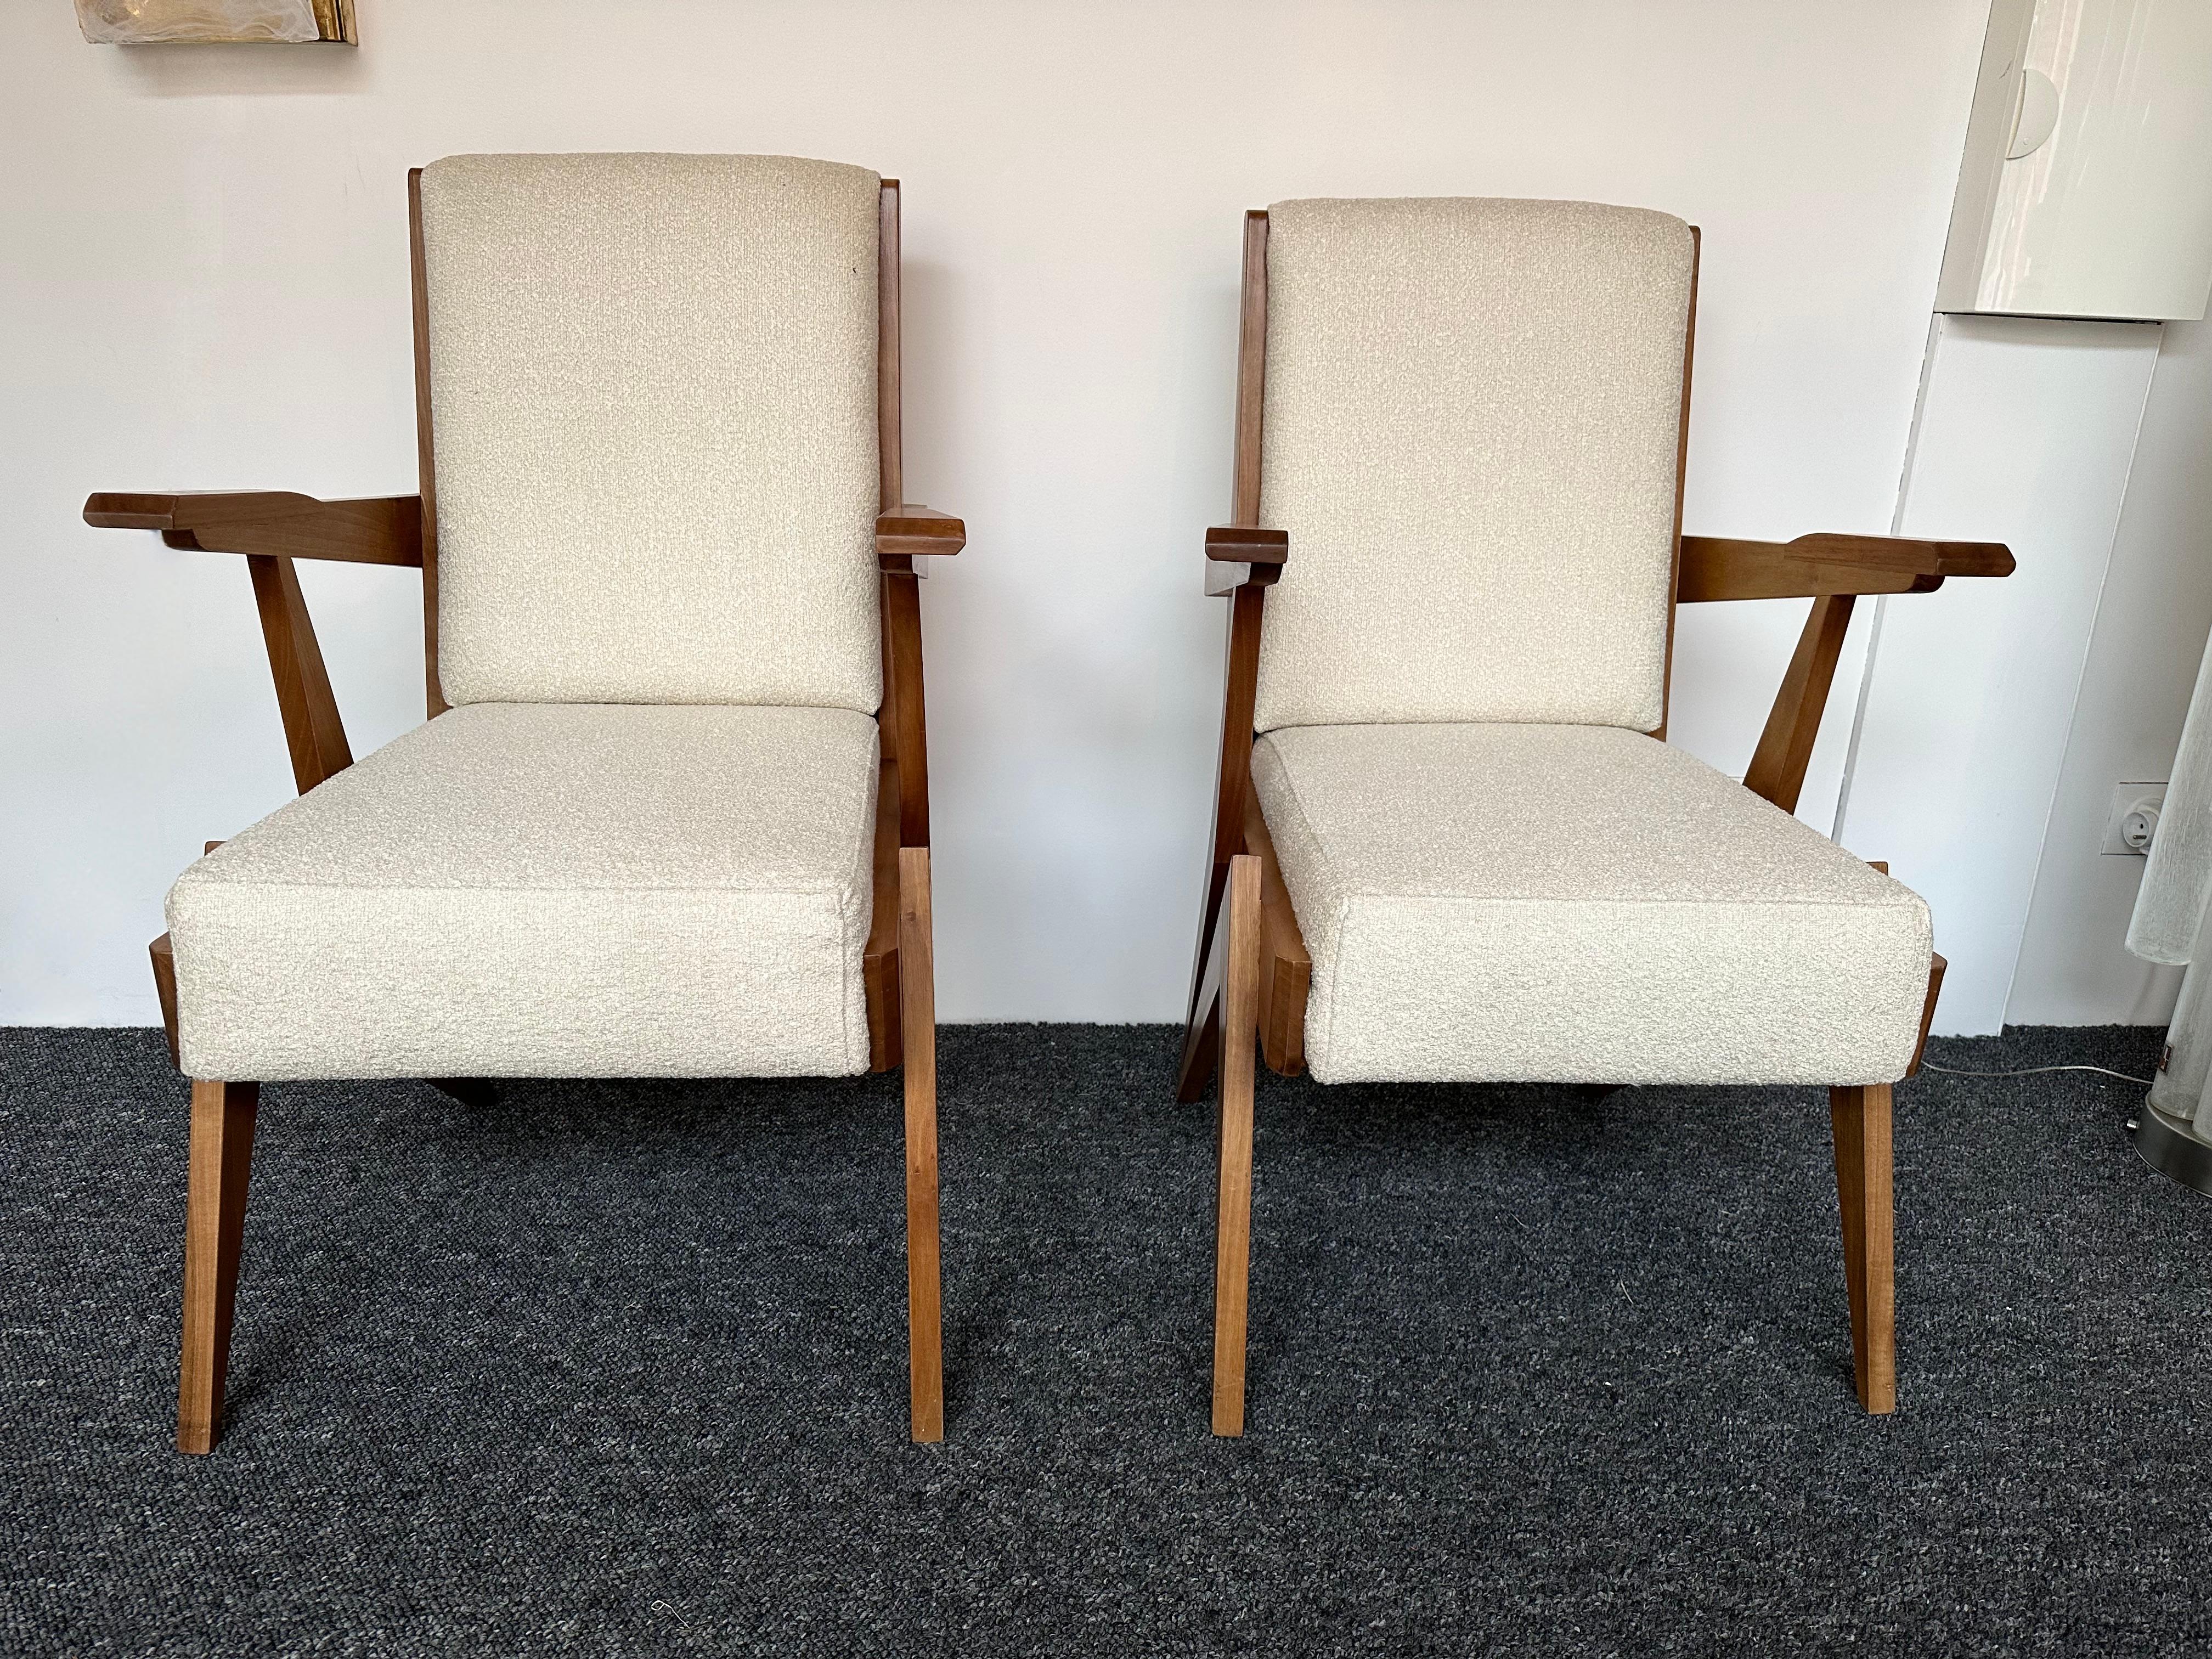 Mid-Century Modern Modernist Pair of wood teak Compass feet armchairs, chairs. In the mood of Pierre Jeanneret, Chandigarh, Le Corbusier, Jean Prouvé, Charlotte Perriand, Jean Royère, Gio Ponti, Augusto Romano. A conservative restoration made and a